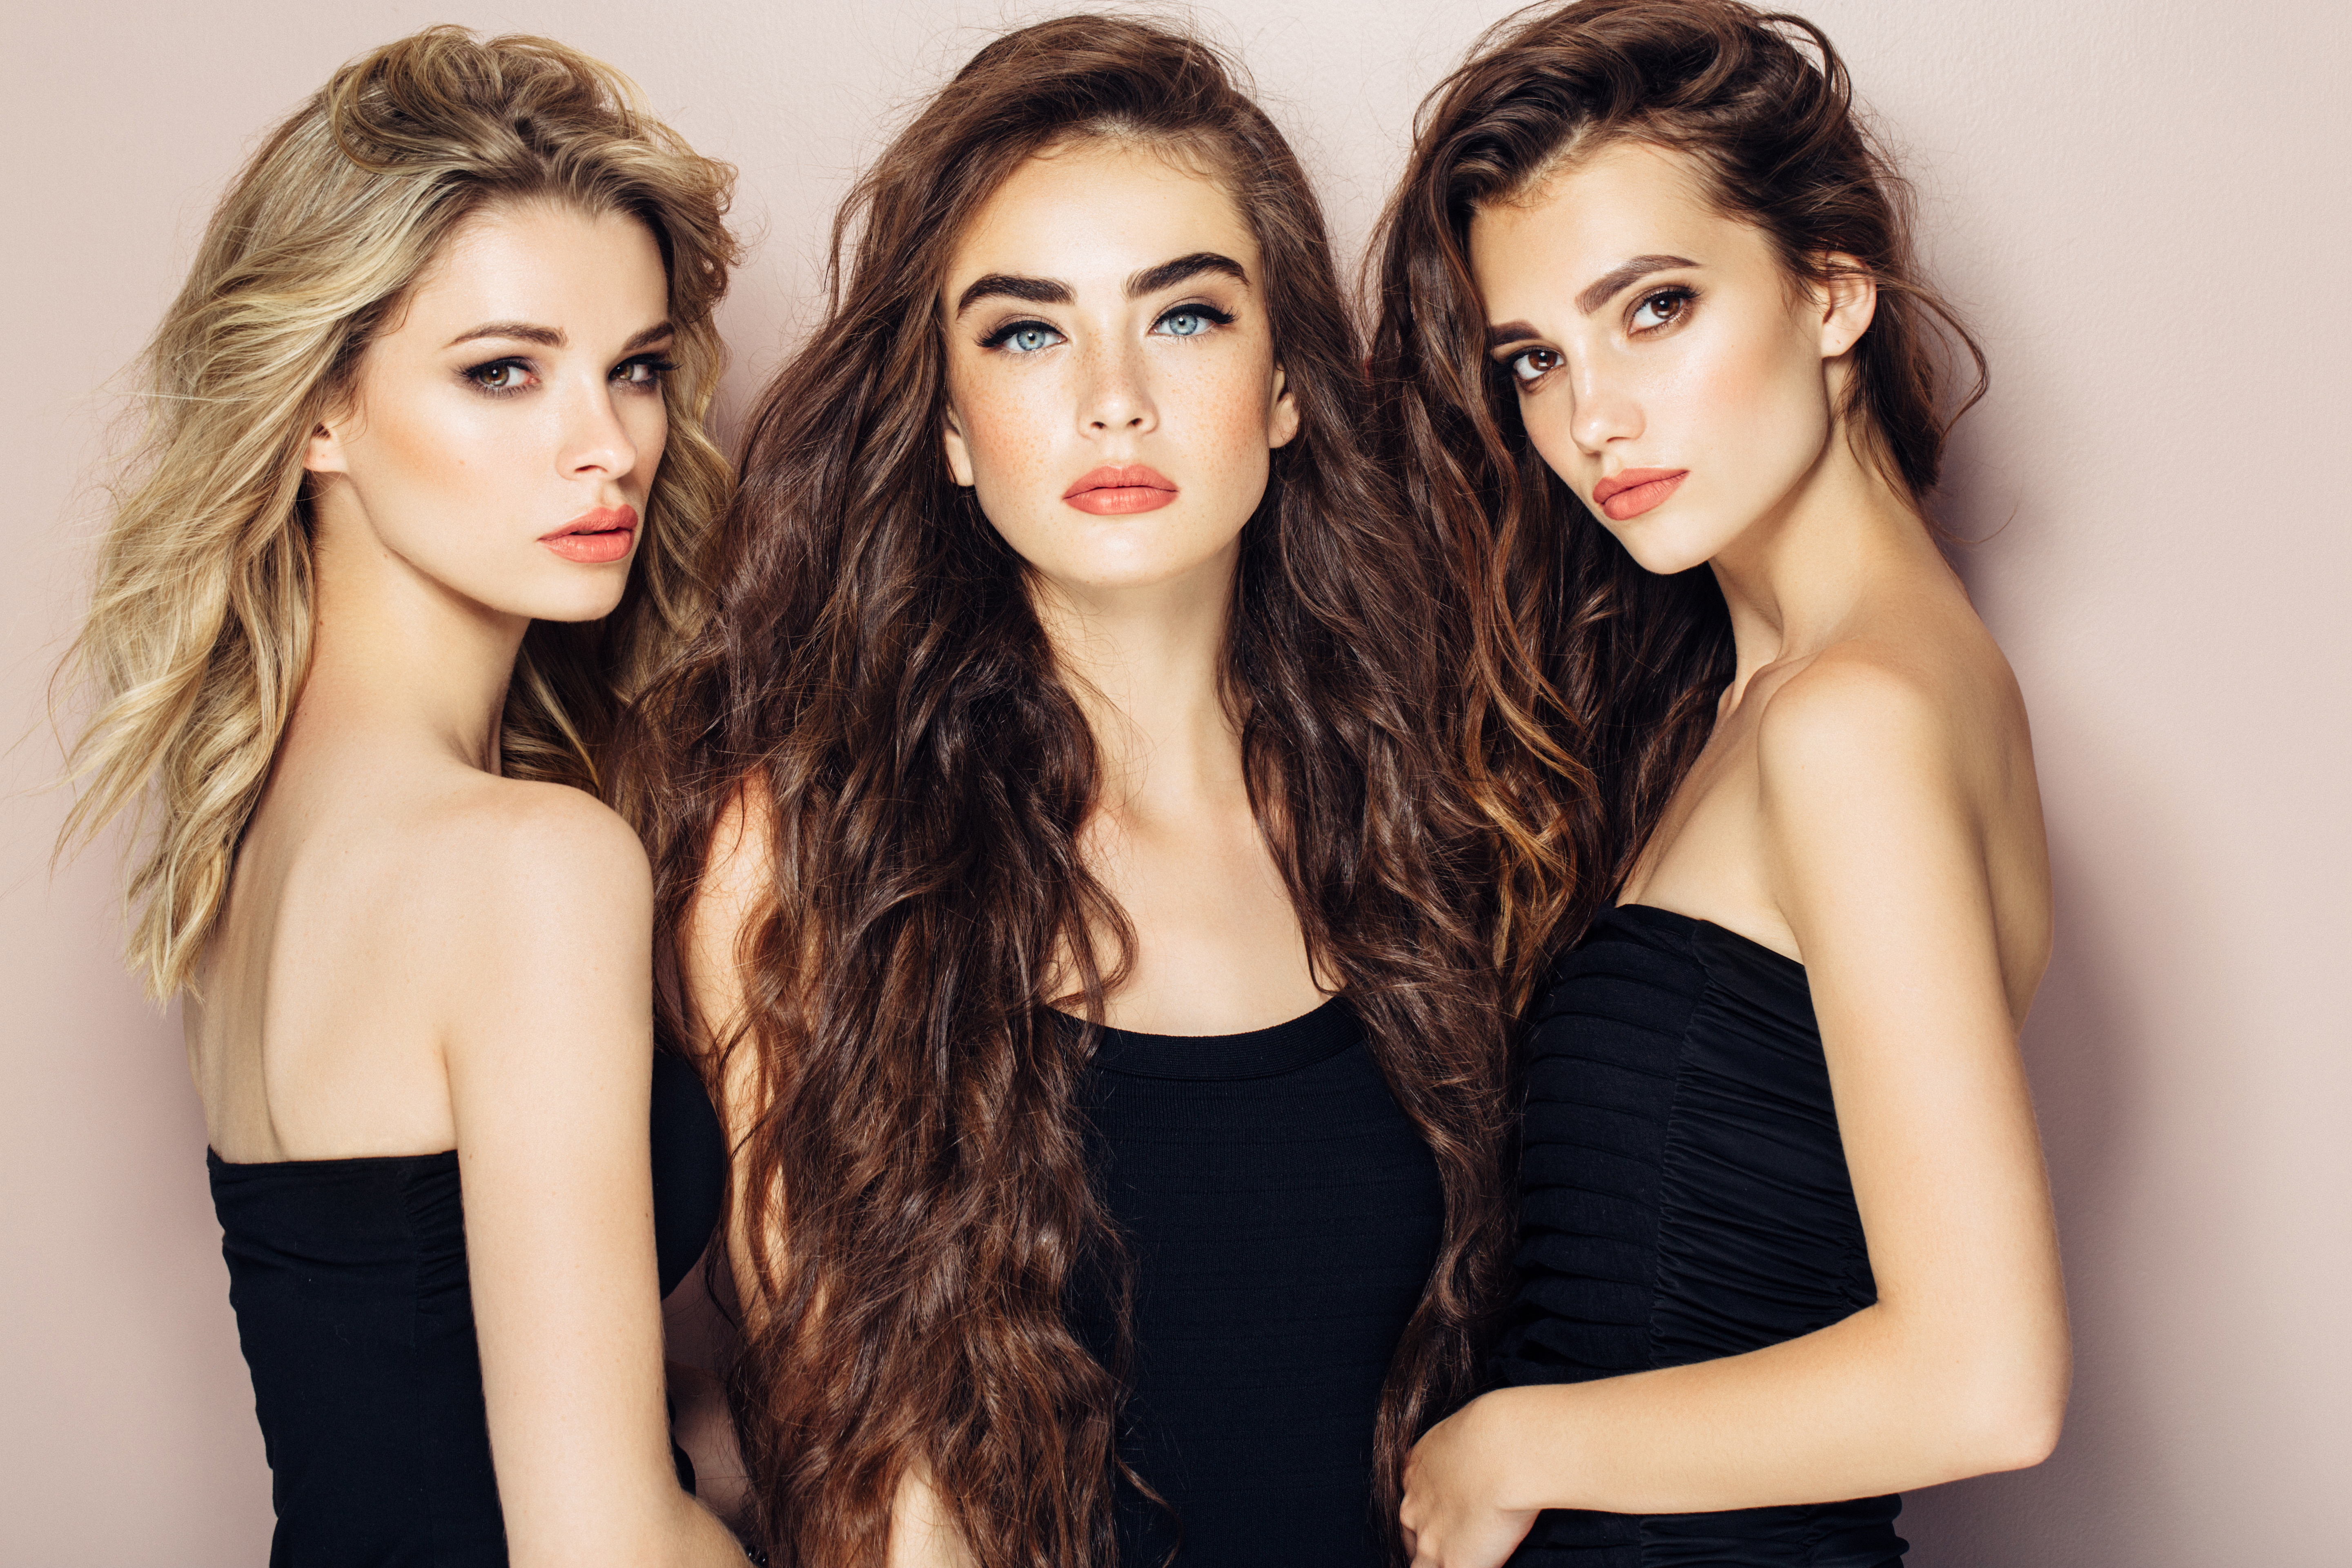 Three beautiful girls with perfect hairstyle and make-up